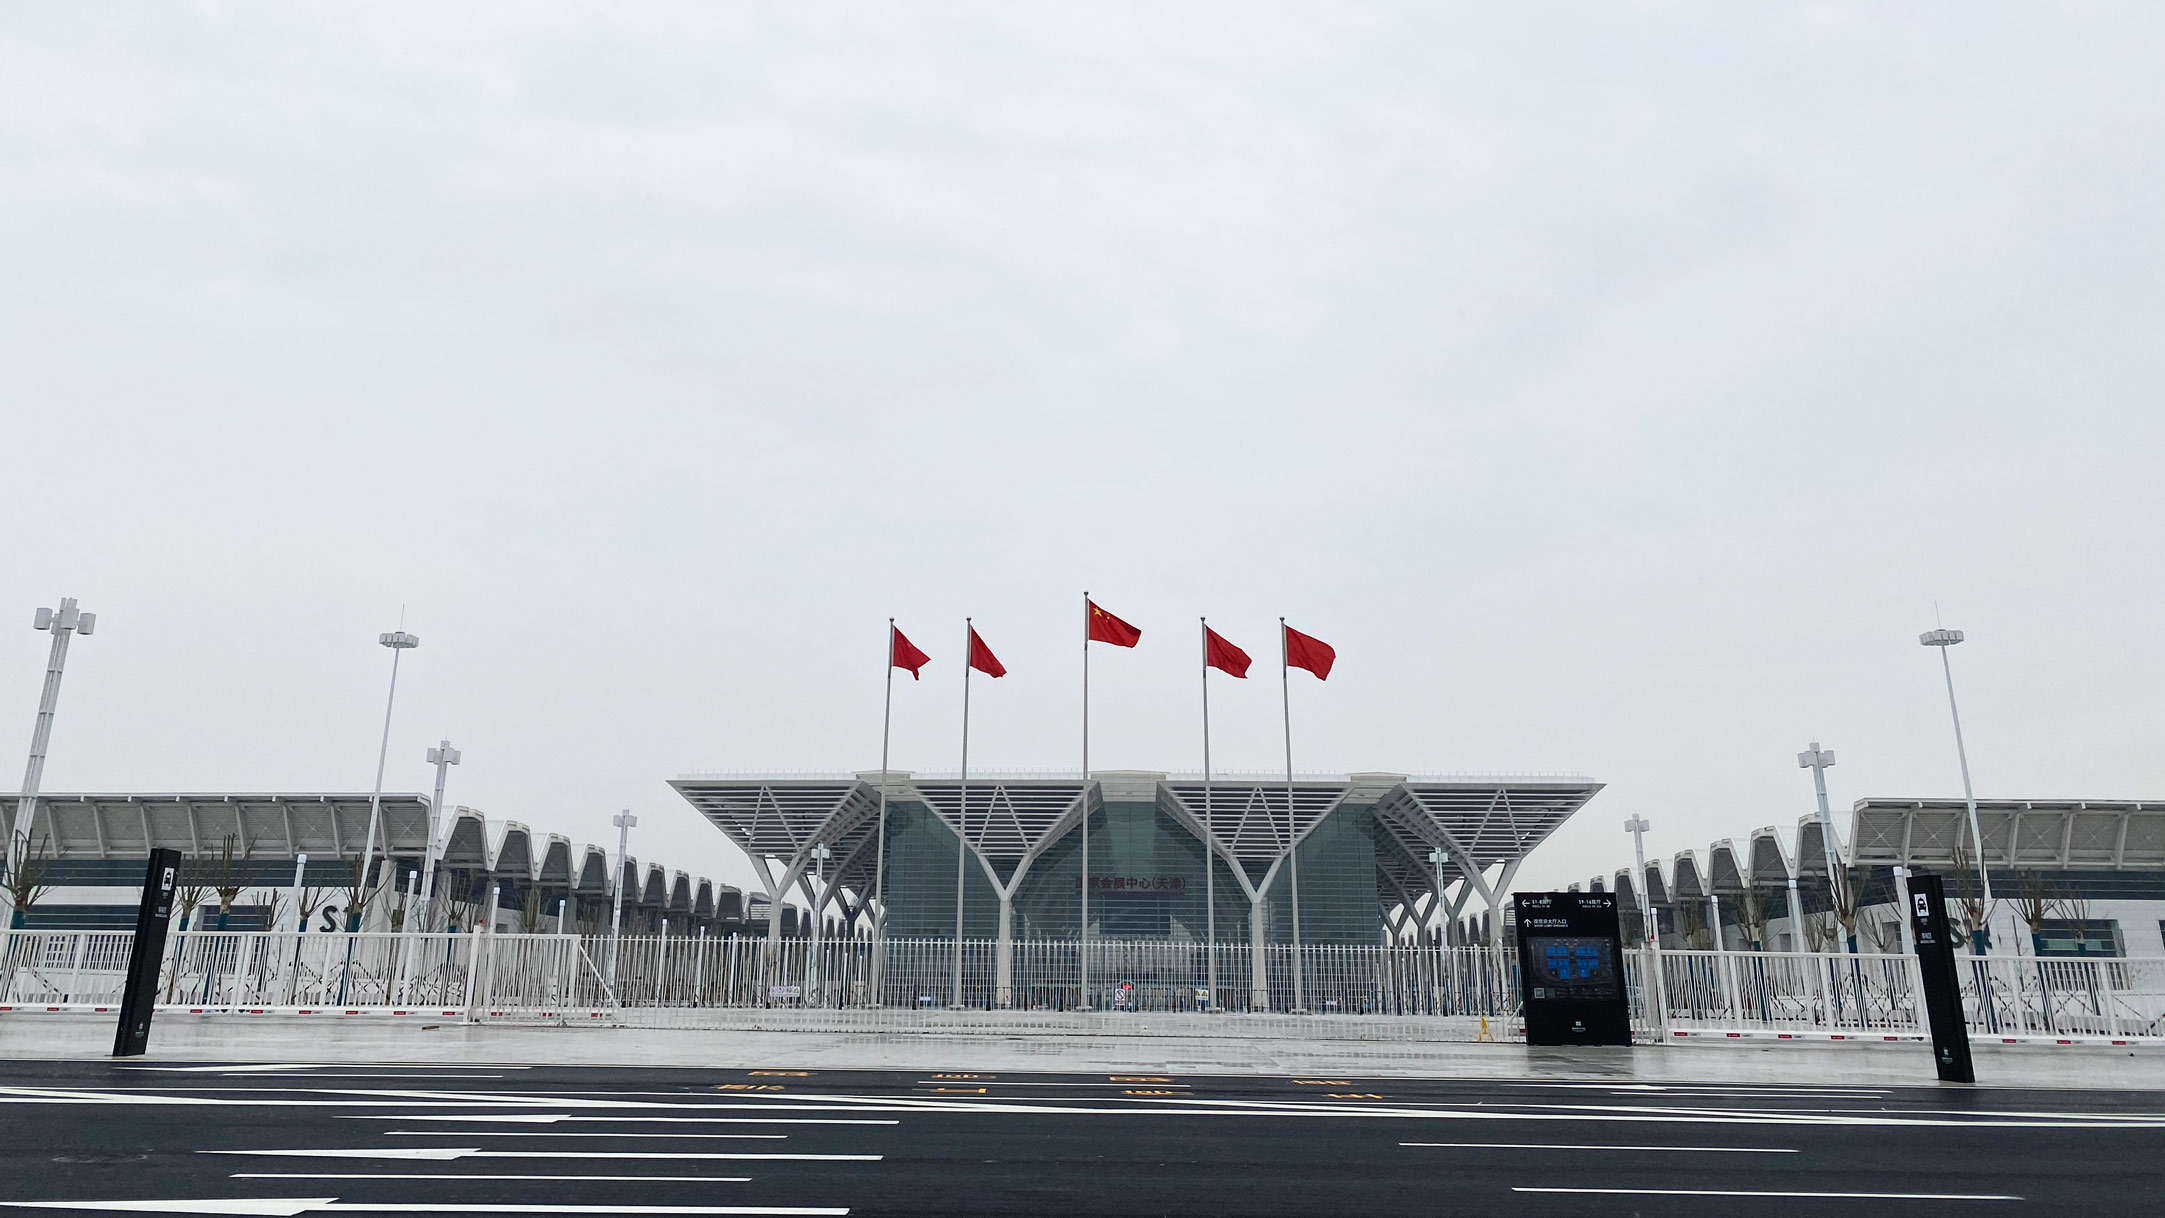 Tianjin National Convention and Exhibition Center